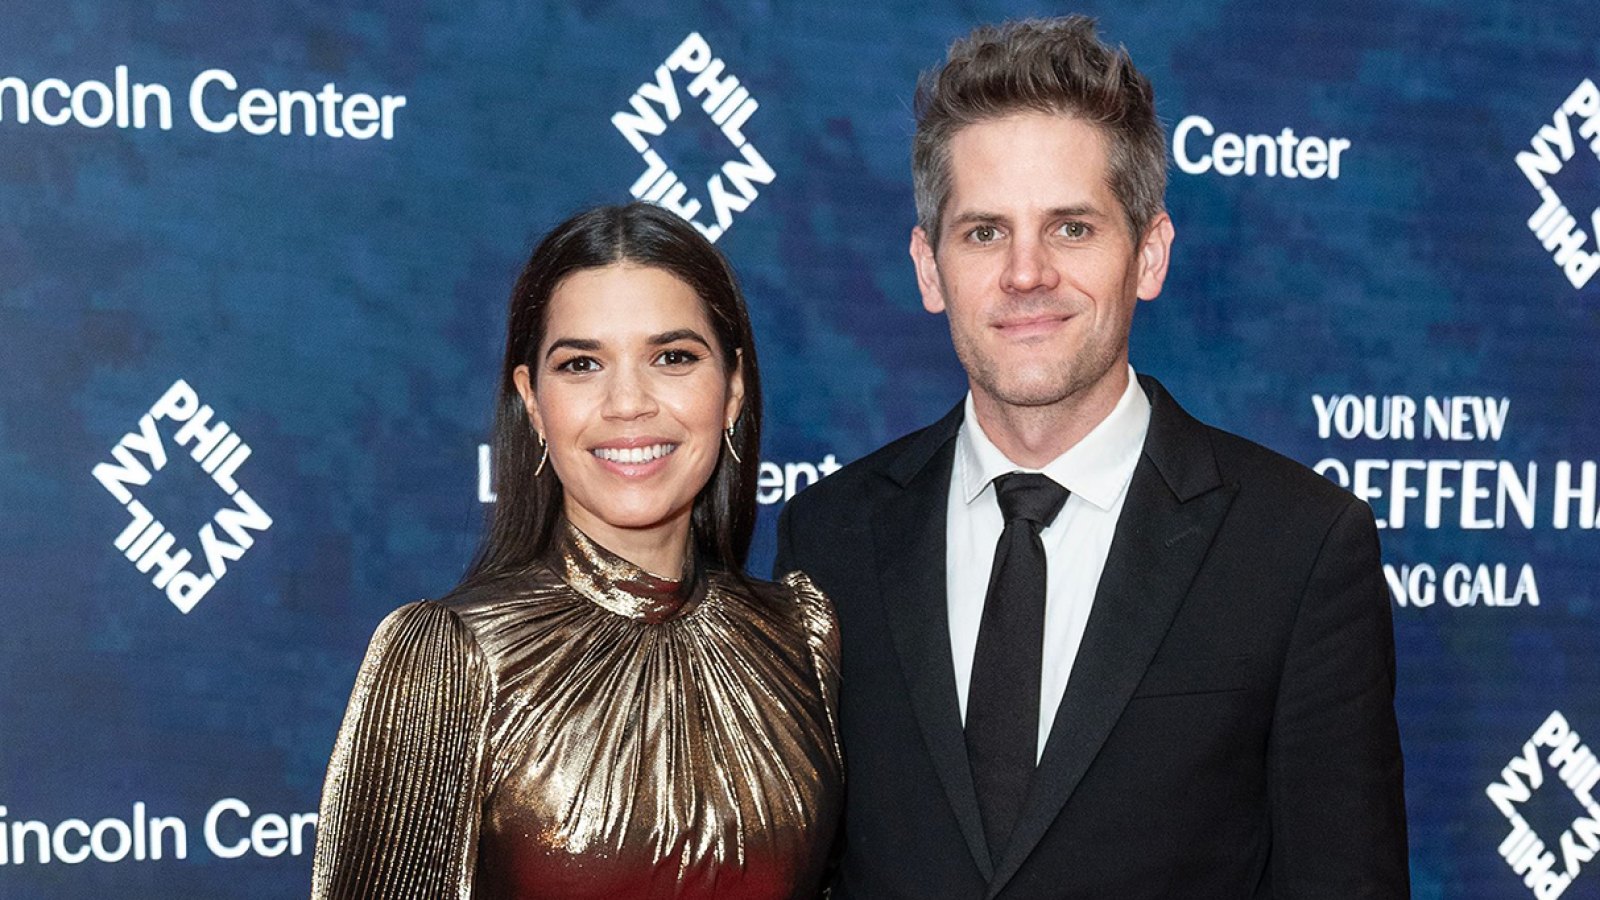 America Ferrera and Ryan Piers Williams: A Timeline of Their Relationship